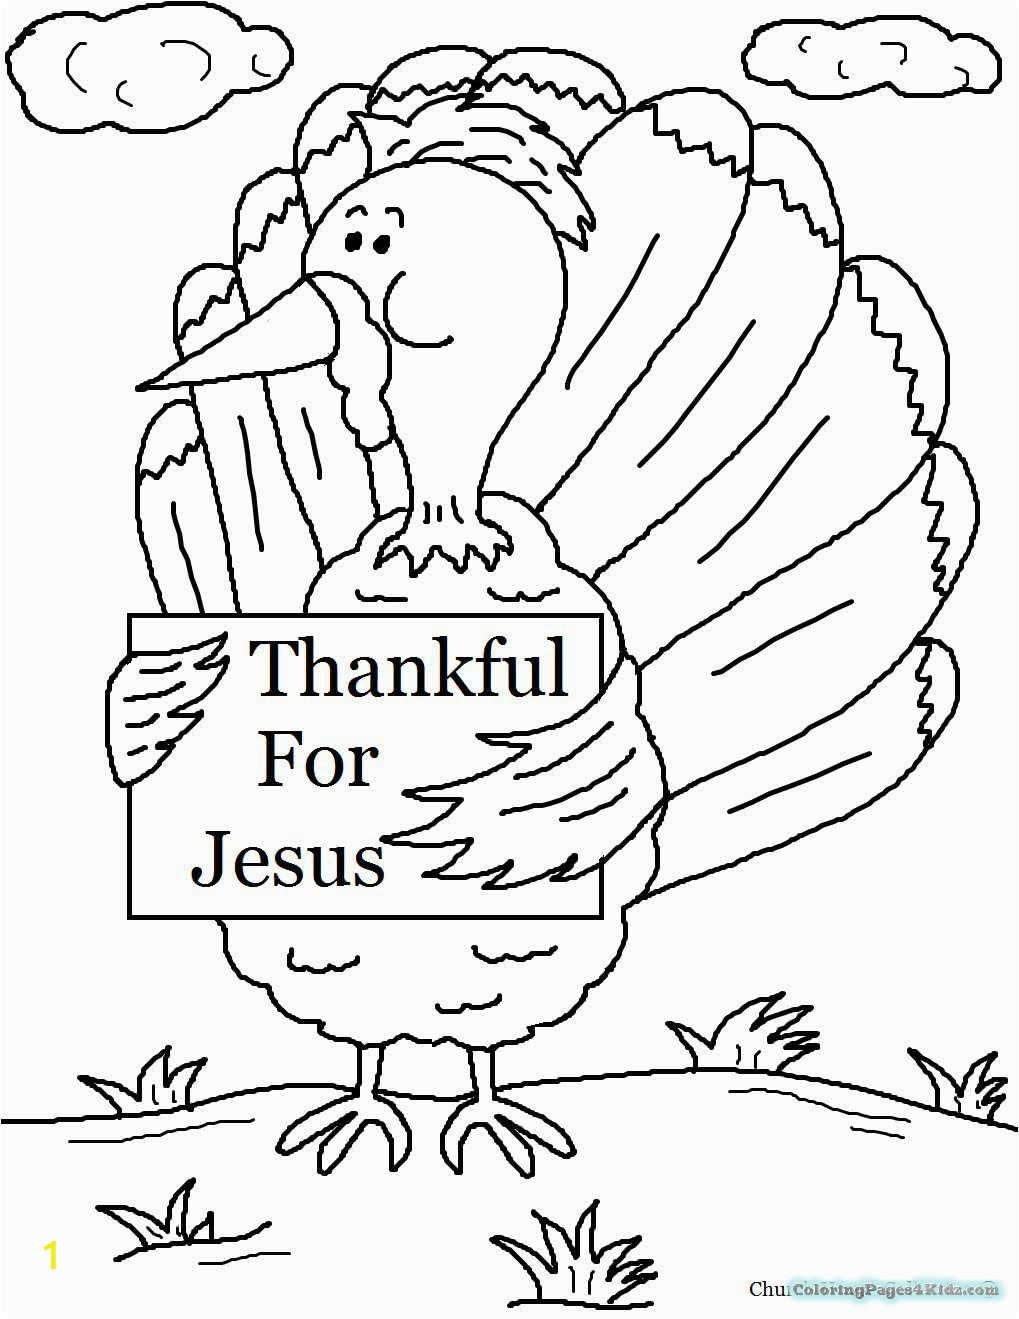 Christian Thanksgiving Coloring Pages for Kids Christian Thanksgiving Coloring Pages